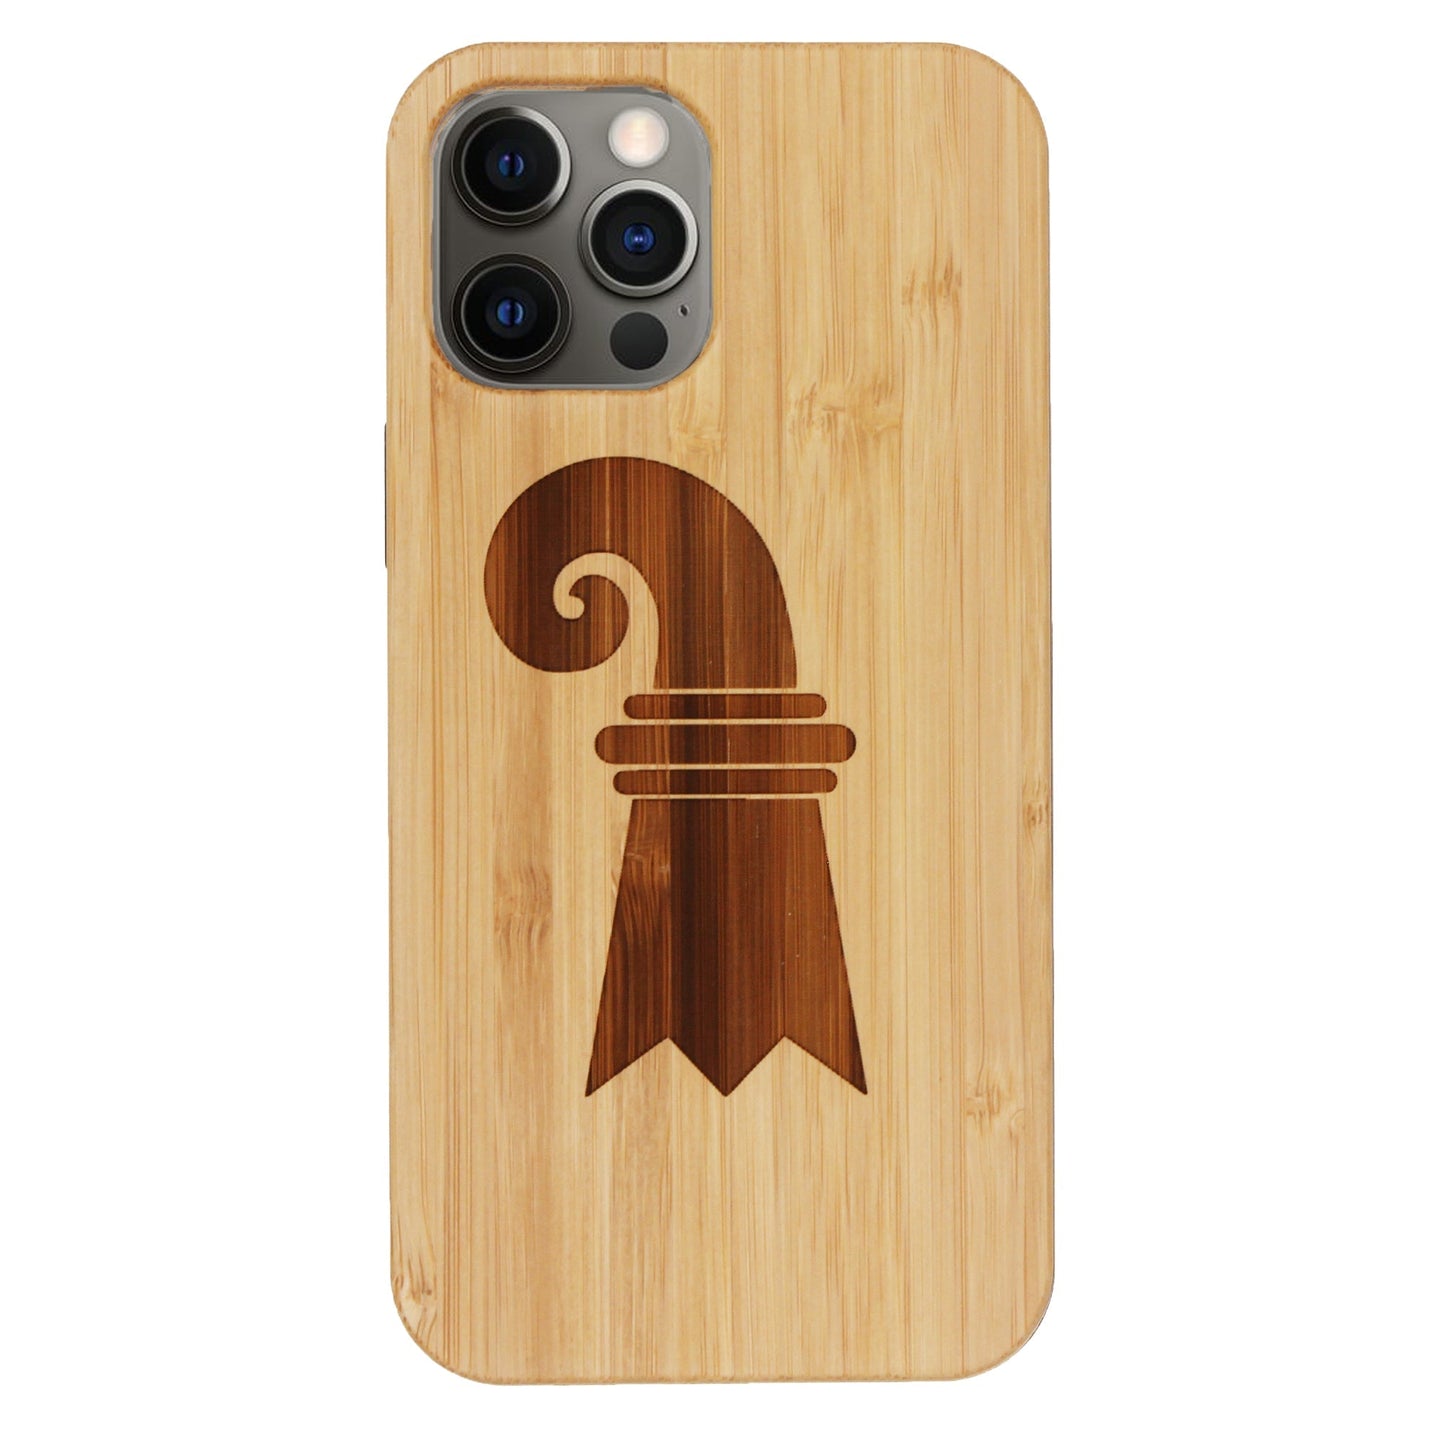 Baslerstab Eden case made of bamboo for iPhone 12 Pro Max 